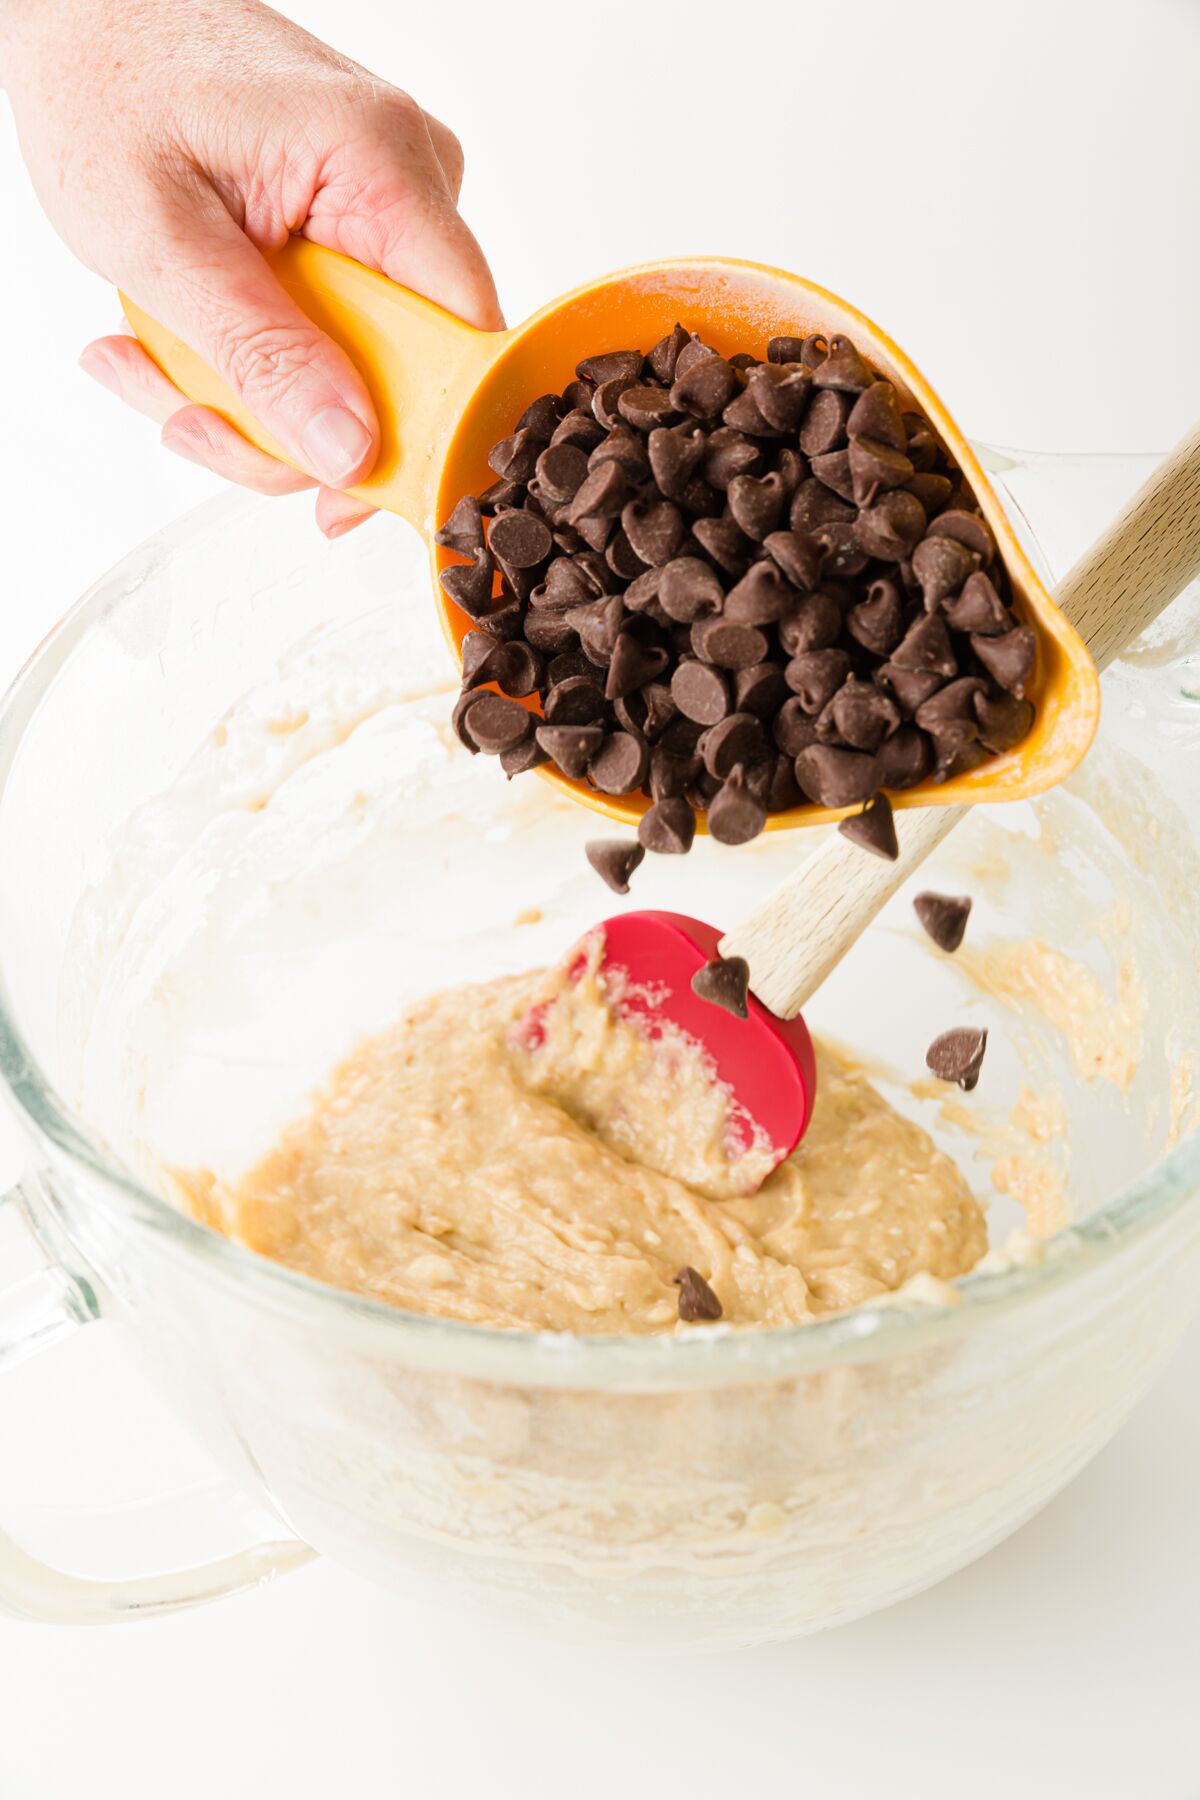 A cup of chocolate chips being poured into a glass mixing bowl